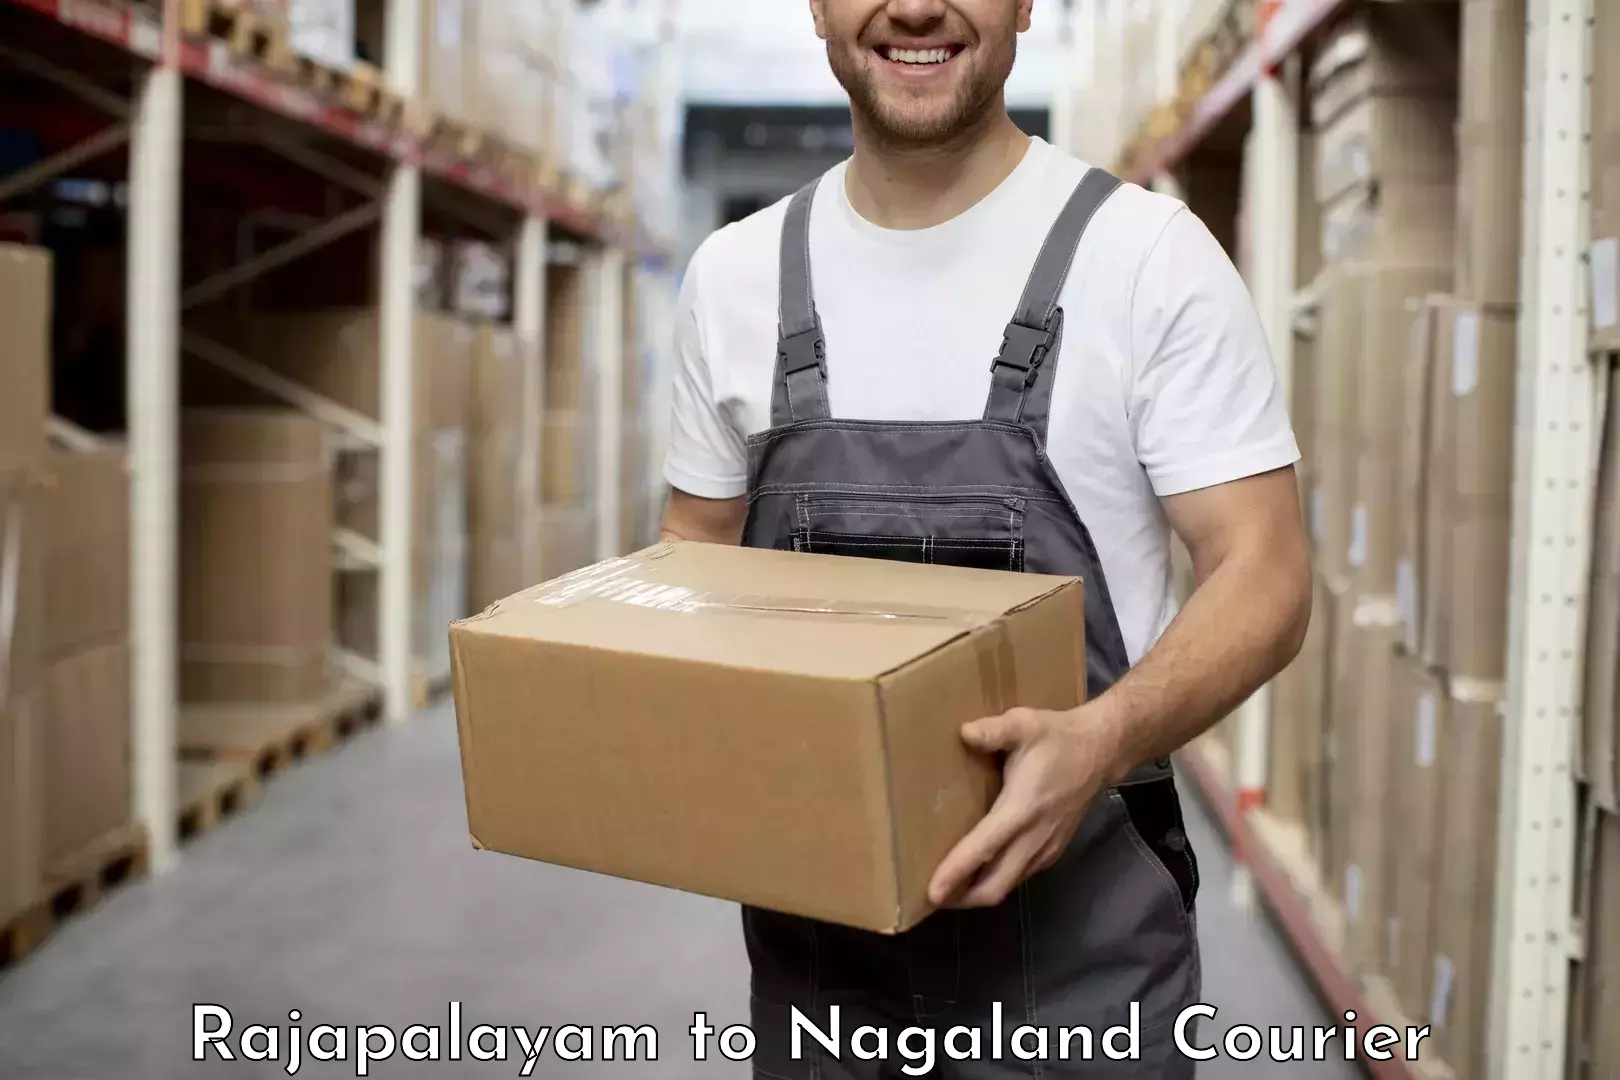 Parcel service for businesses Rajapalayam to Nagaland